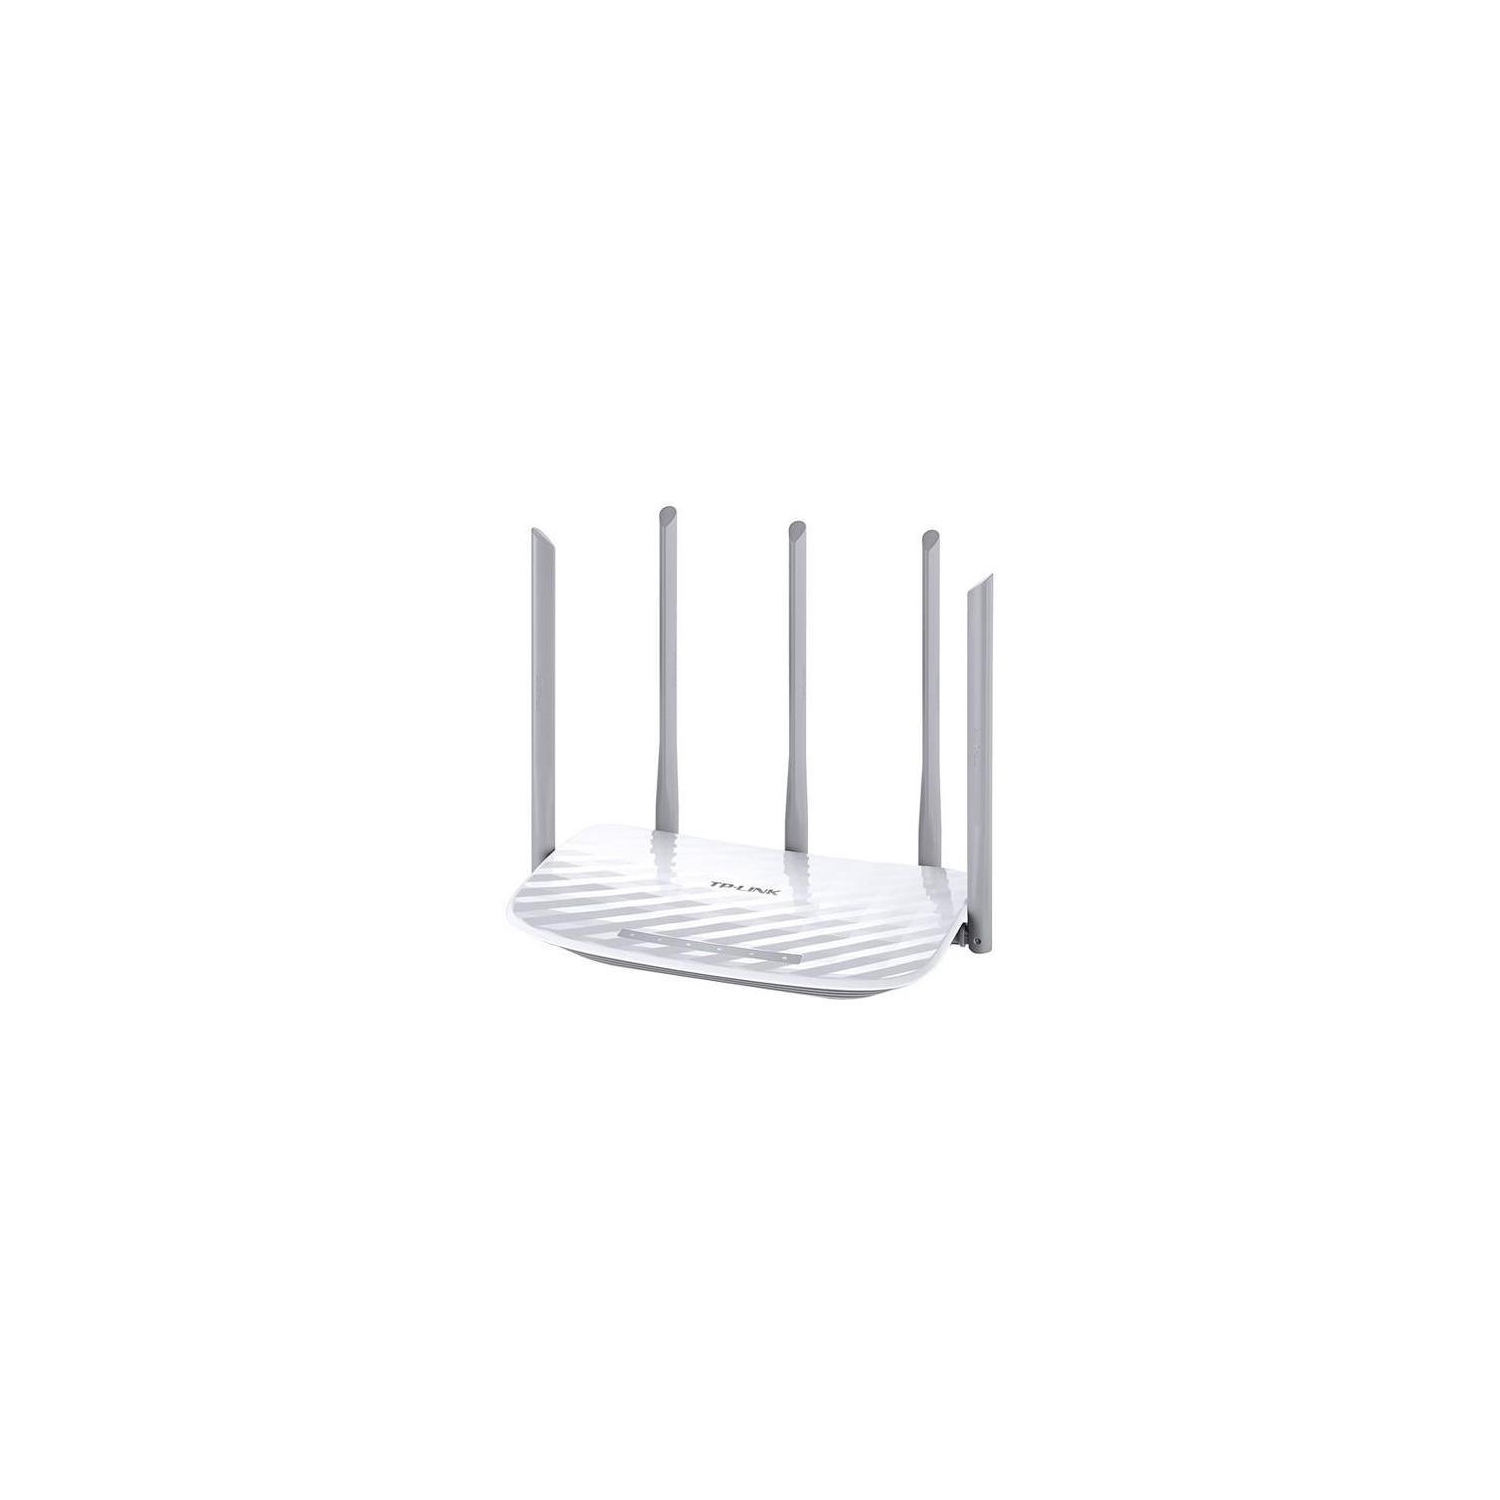 Refurbished (Good) - TP-LINK Certified AC1350 Wireless Dual Band Router (Archer C60)